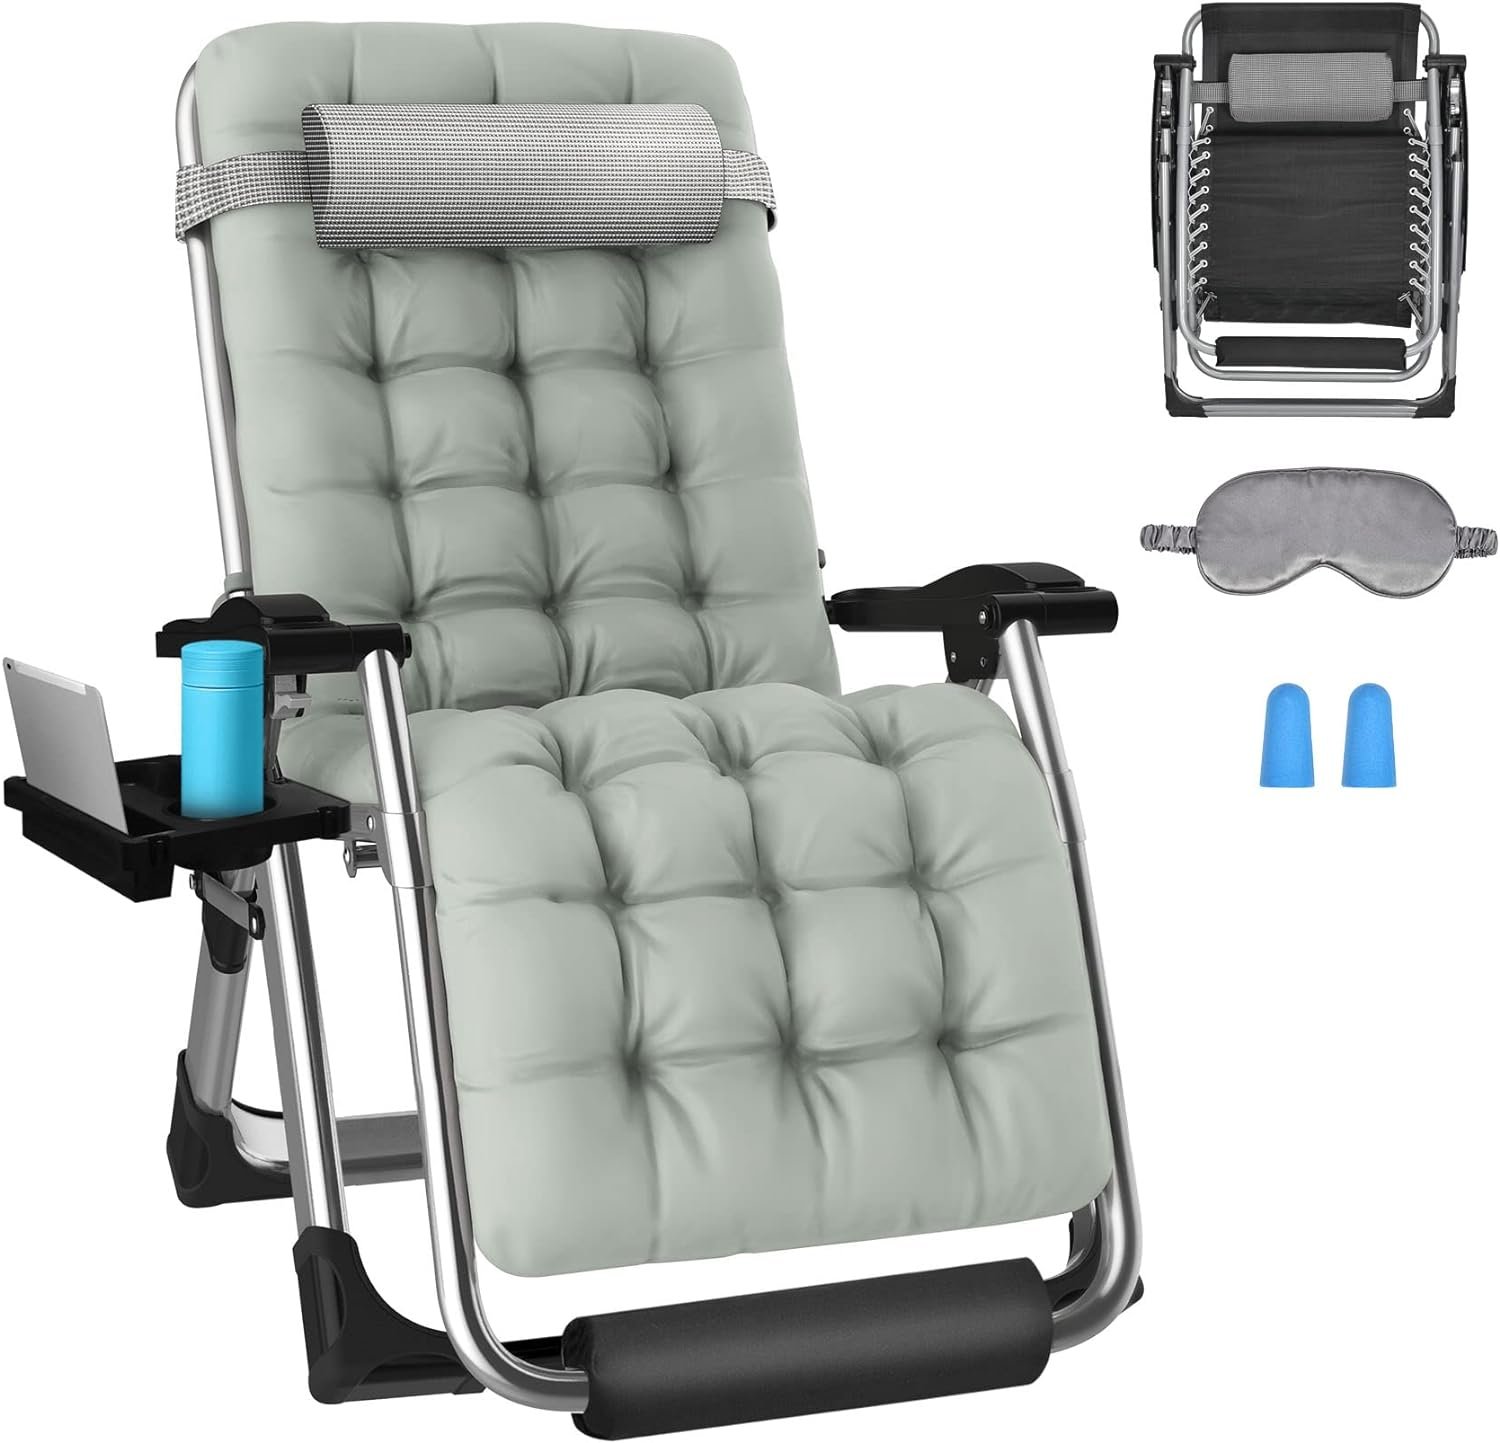 Padded Patio Lounge Chair Review